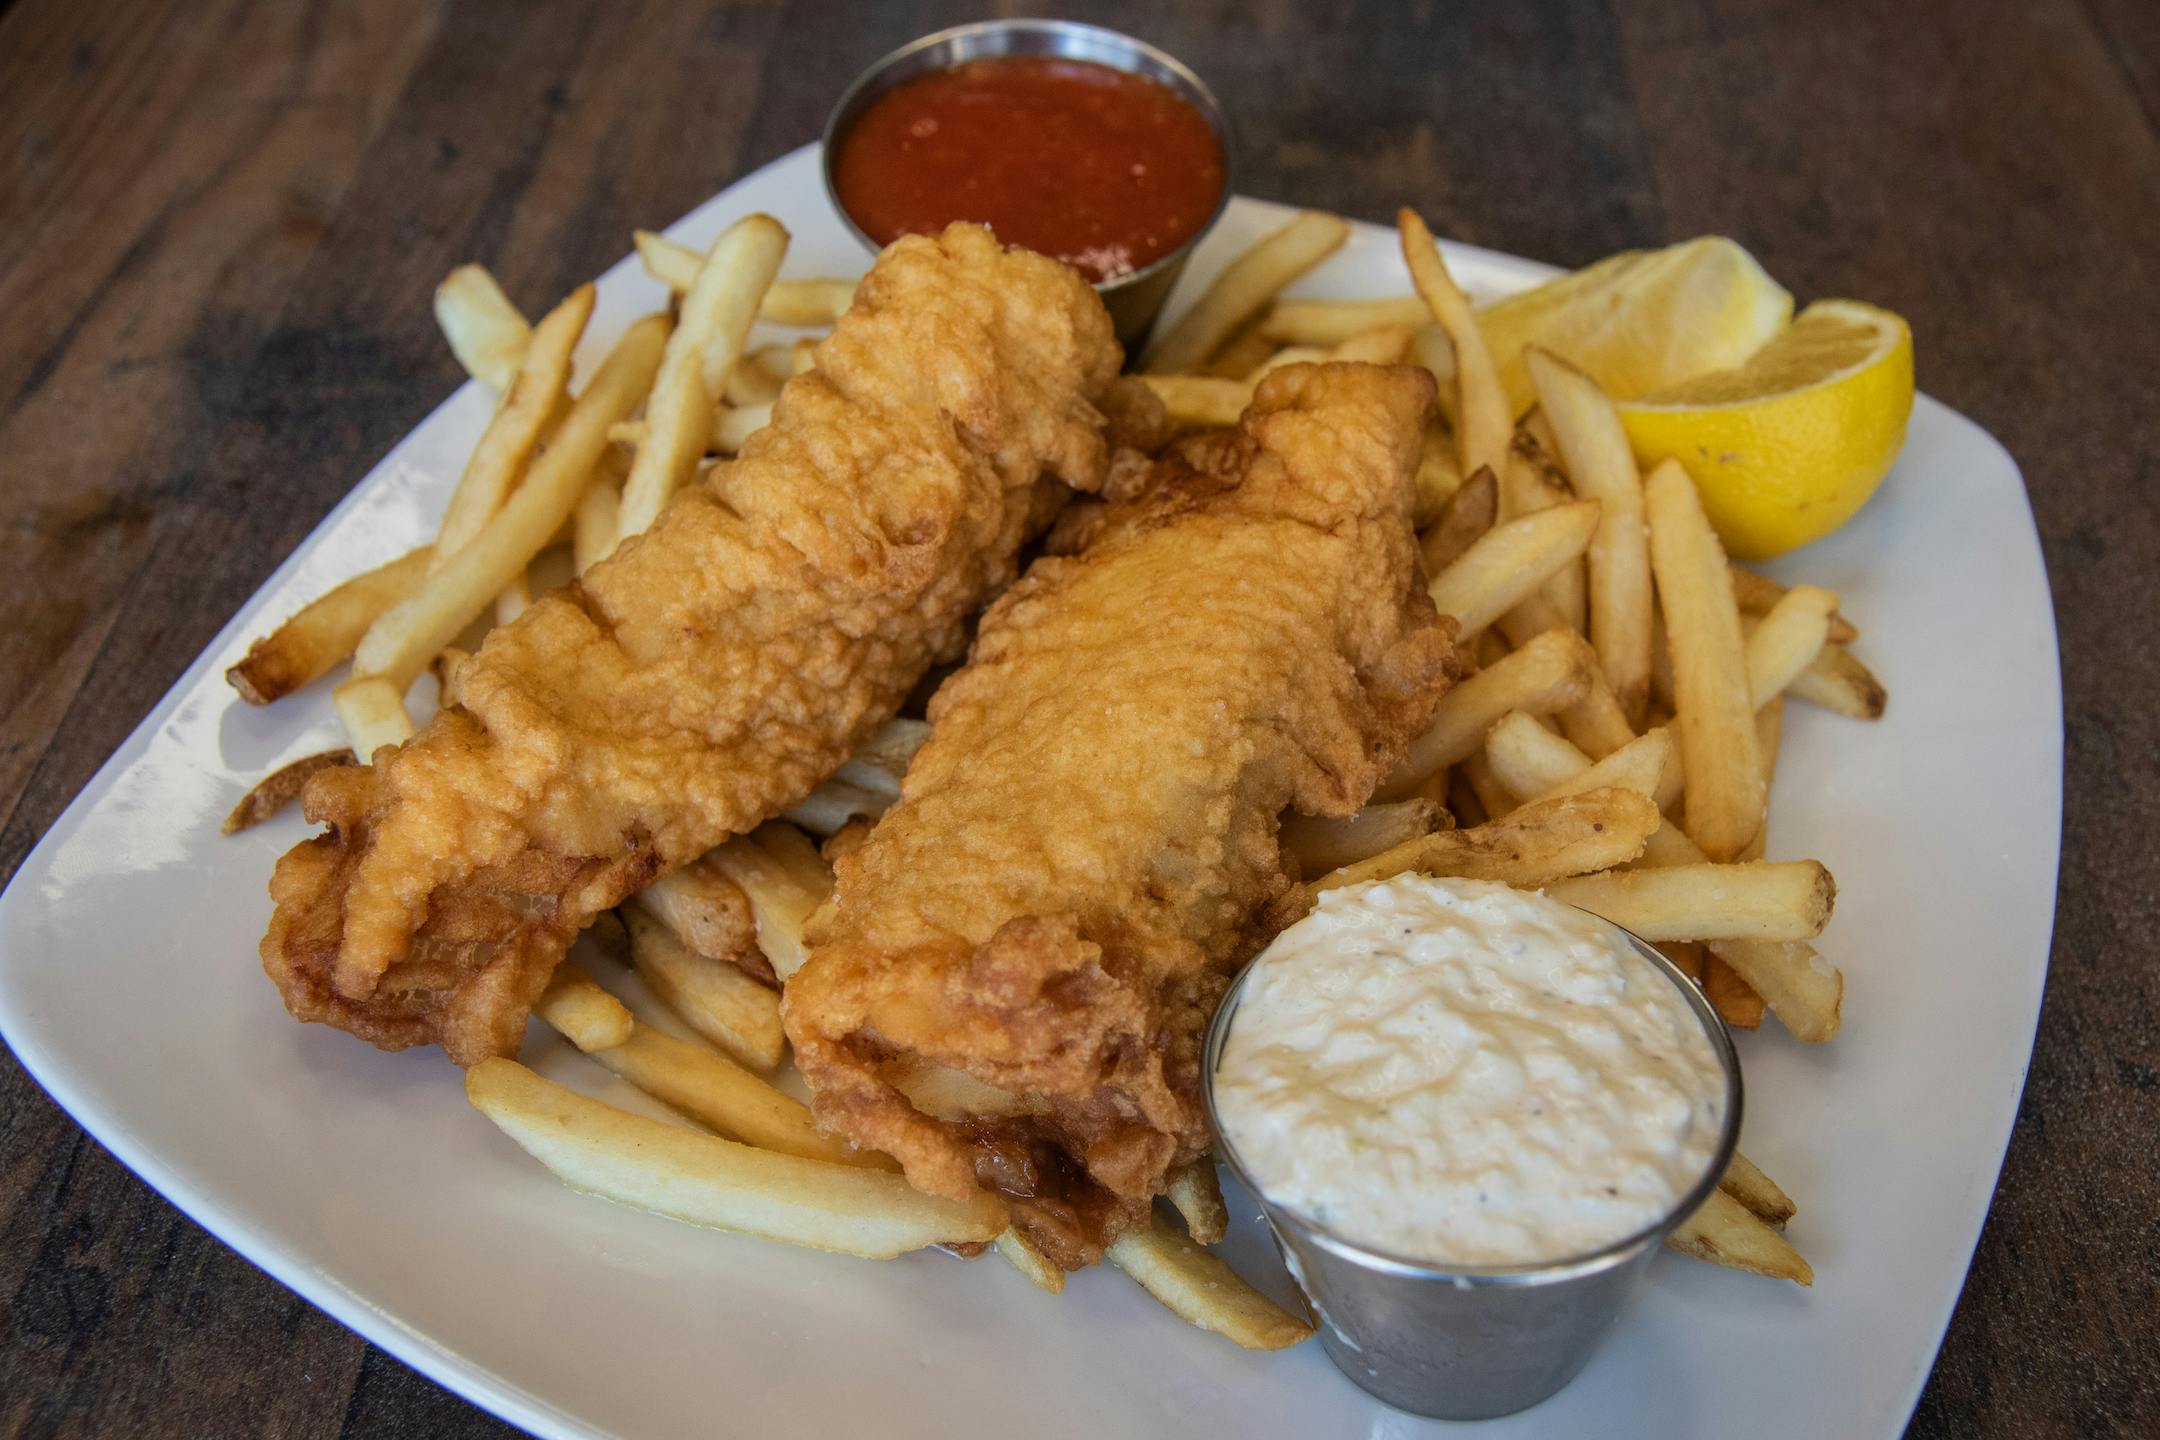 Fish & Chips from Firehouse Grill - Chicago Ave in Evanston, IL